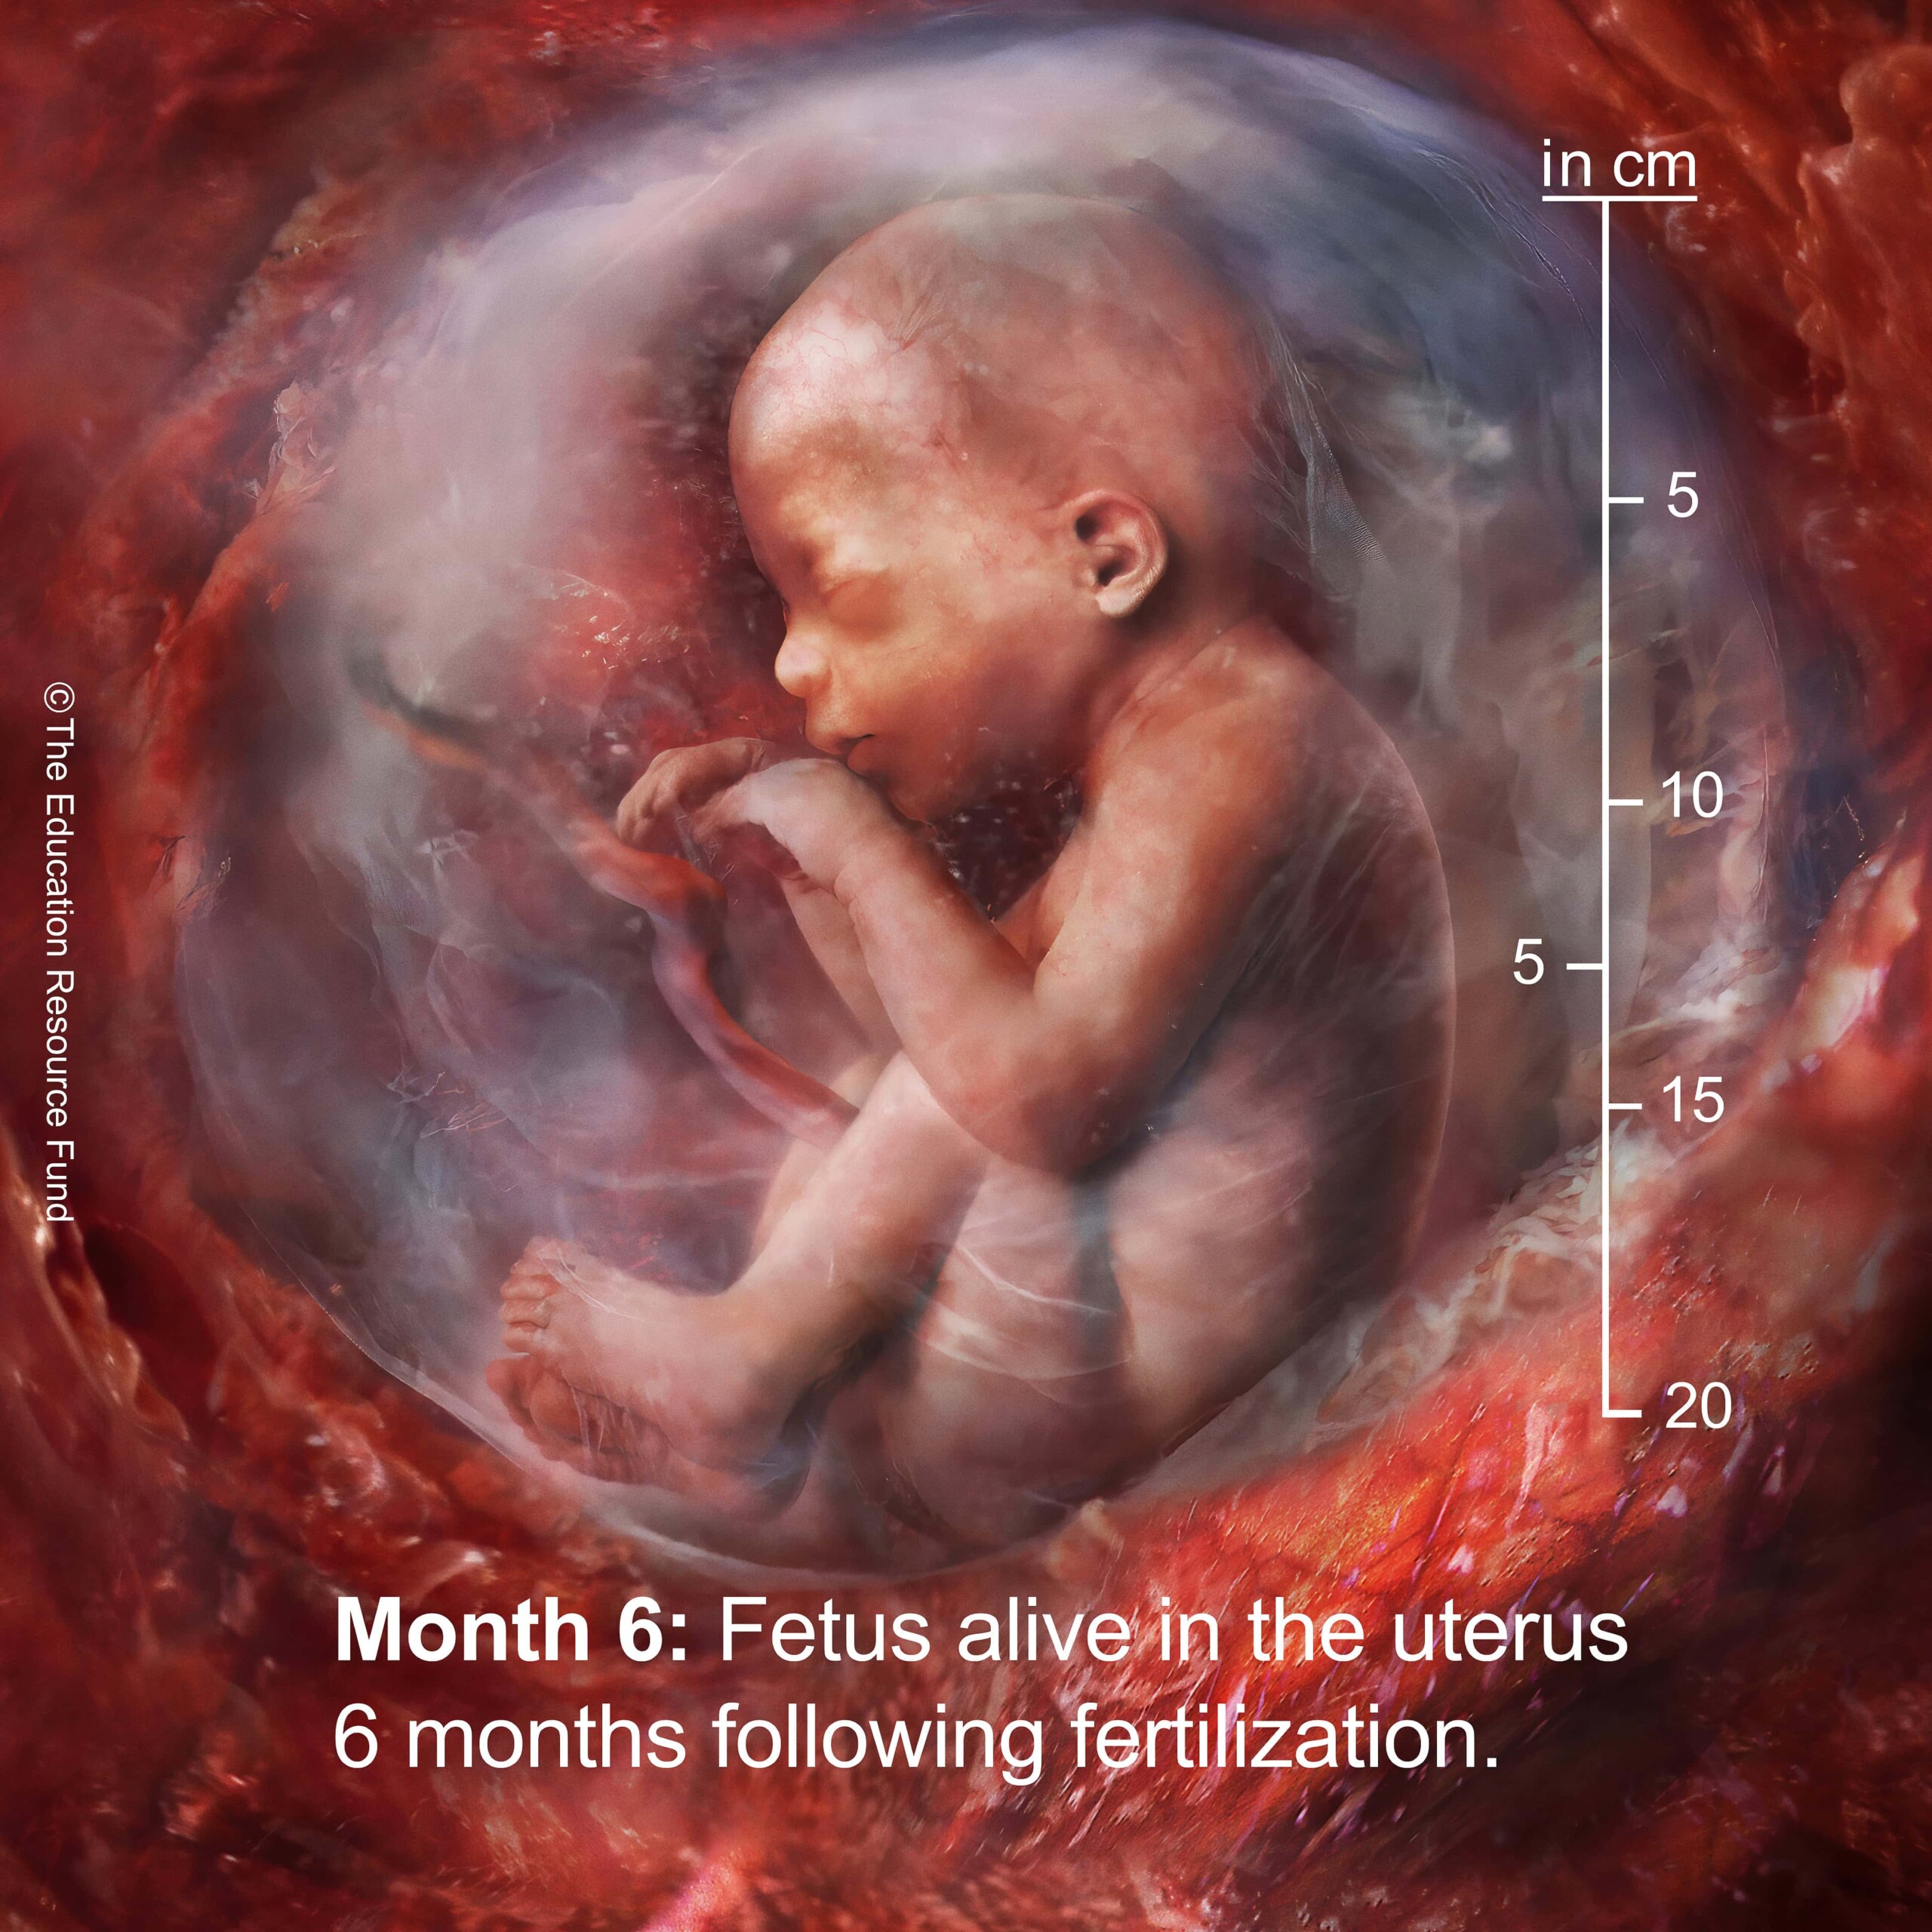 Month 6: Embryo alive in the uterus 6 months following fertilization